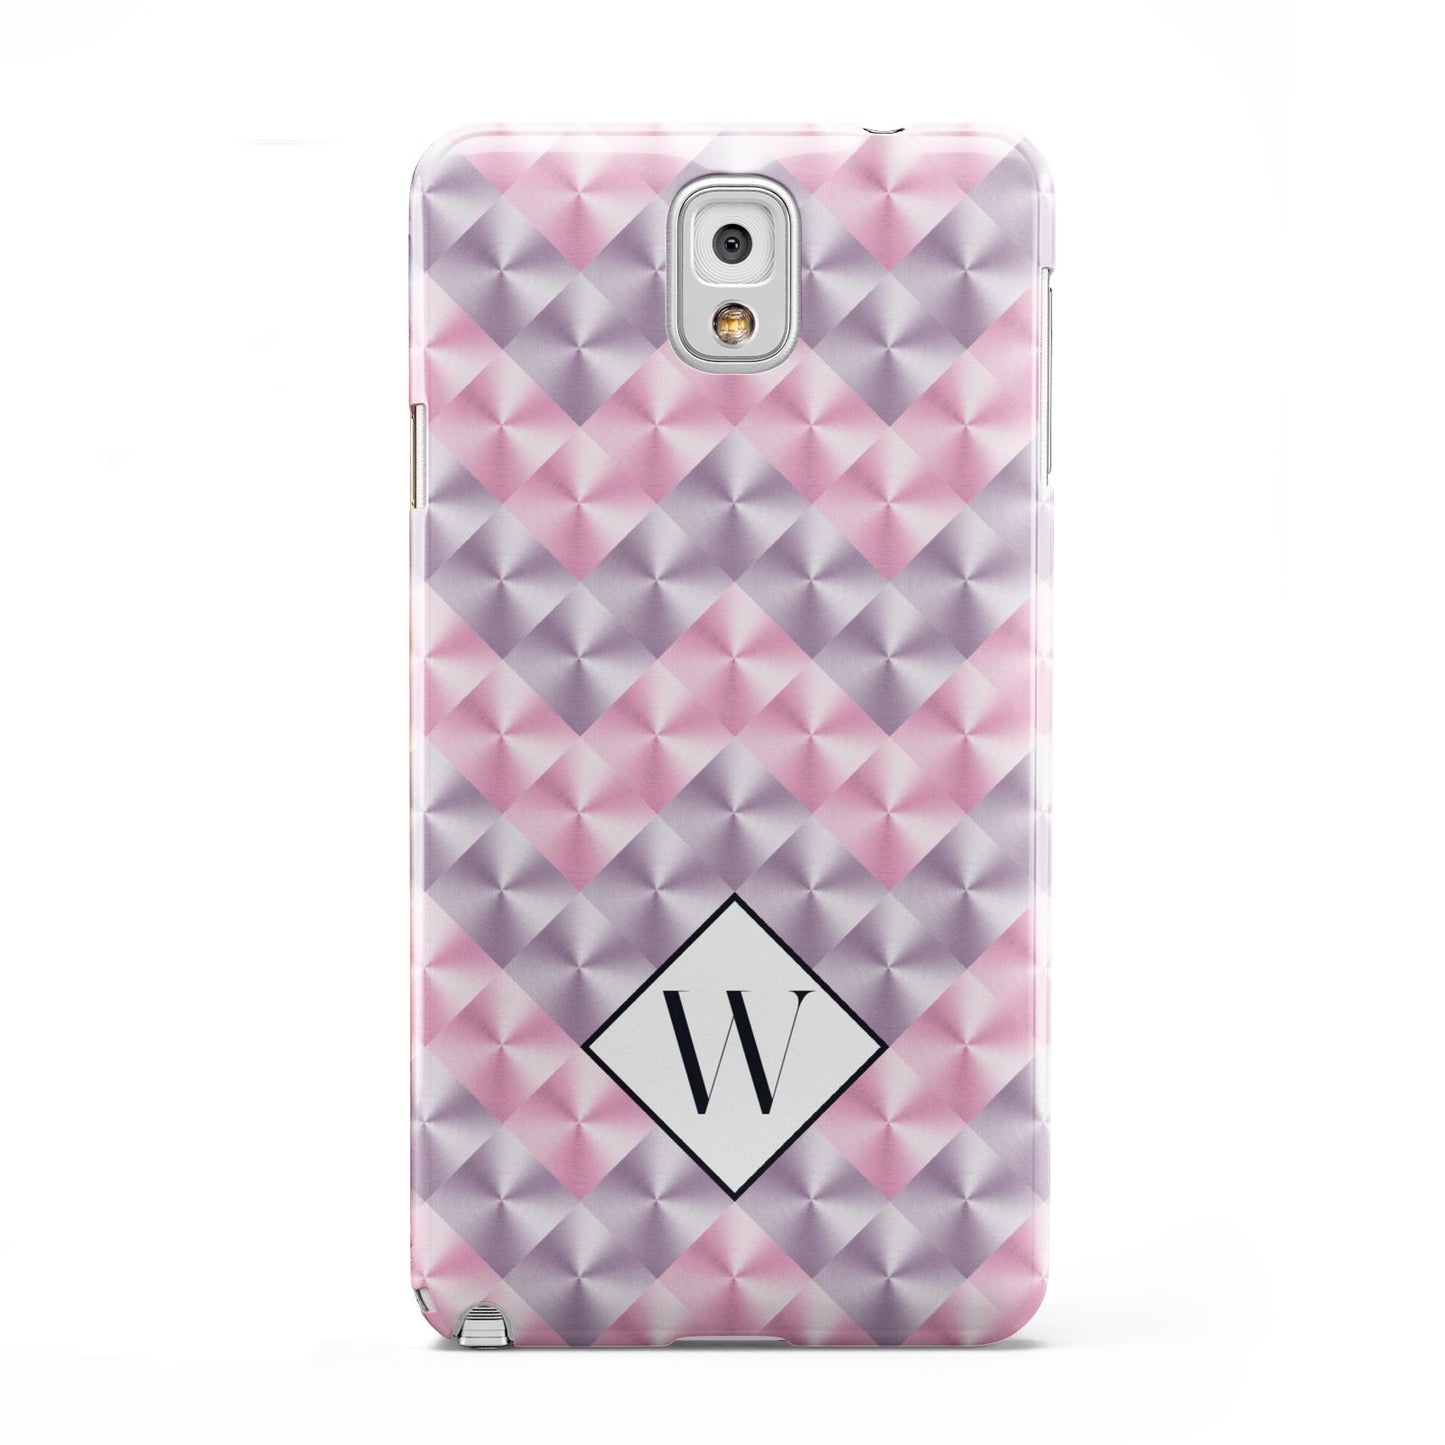 Personalised Mother Of Pearl Monogram Letter Samsung Galaxy Note 3 Case